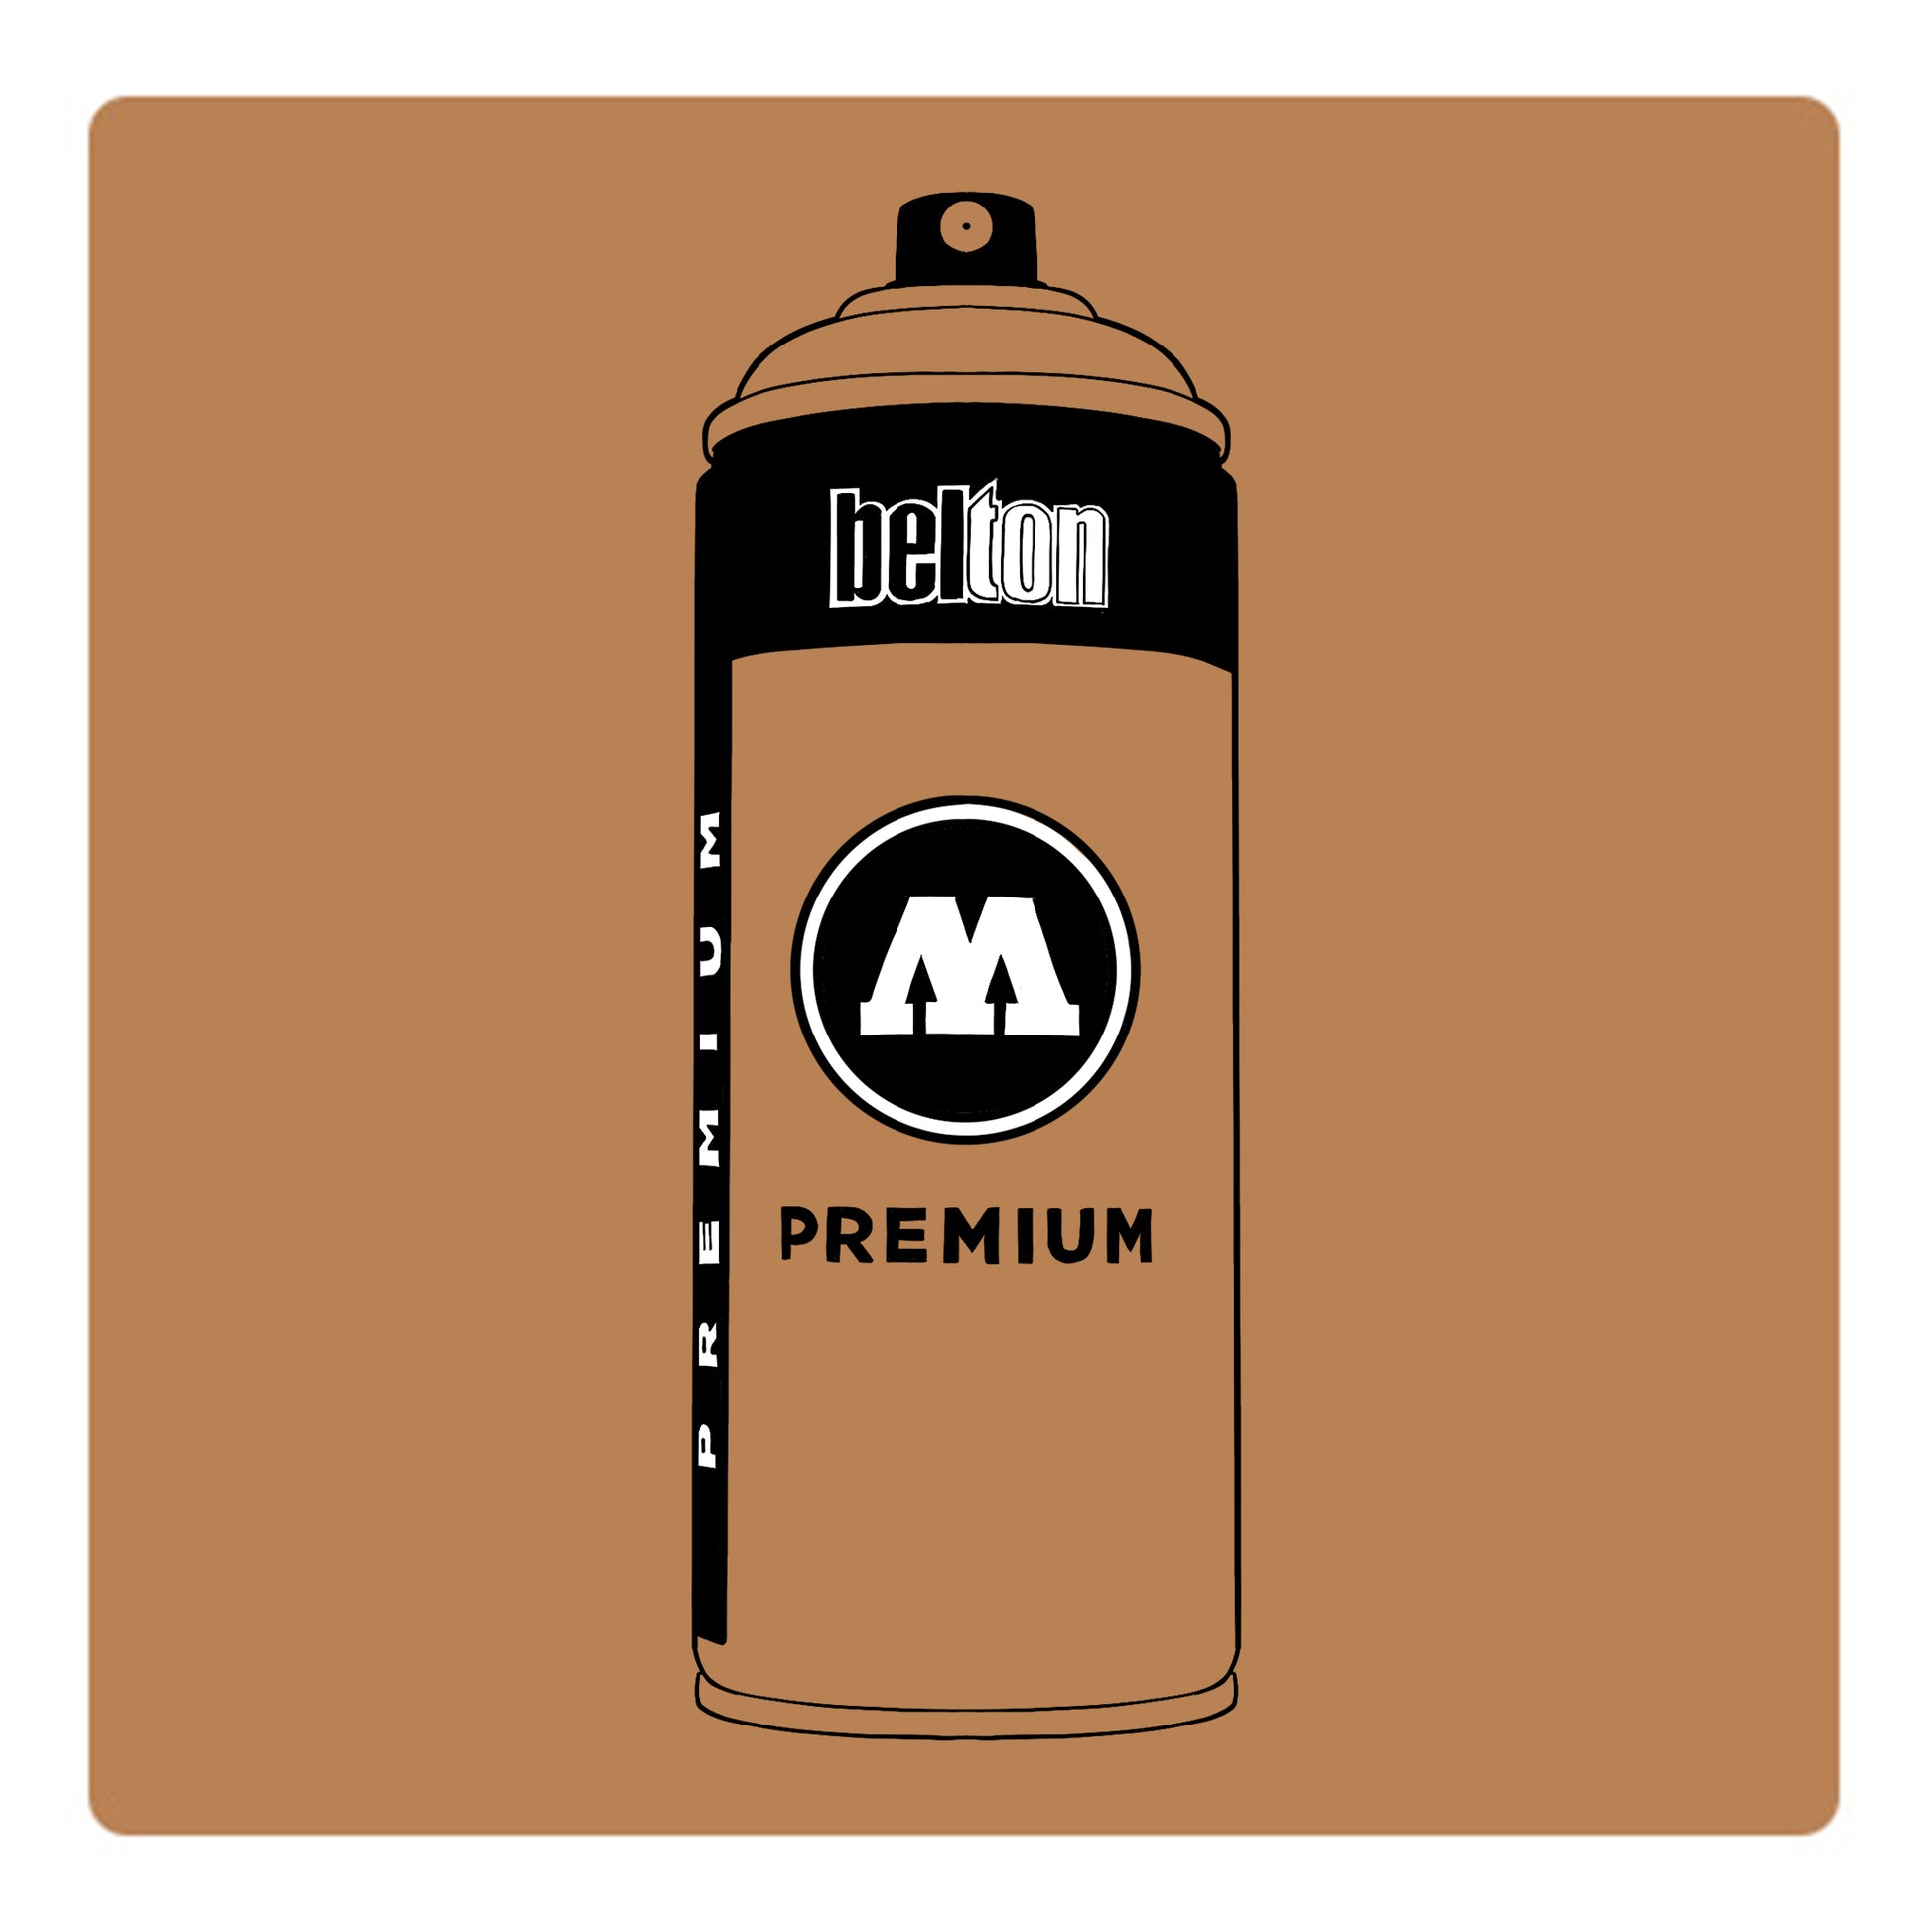 A black outline drawing of a tan brown spray paint can with the words "belton","premium" and the letter"M" written on the face in black and white font. The background is a color swatch of the same Tan brown with a white border